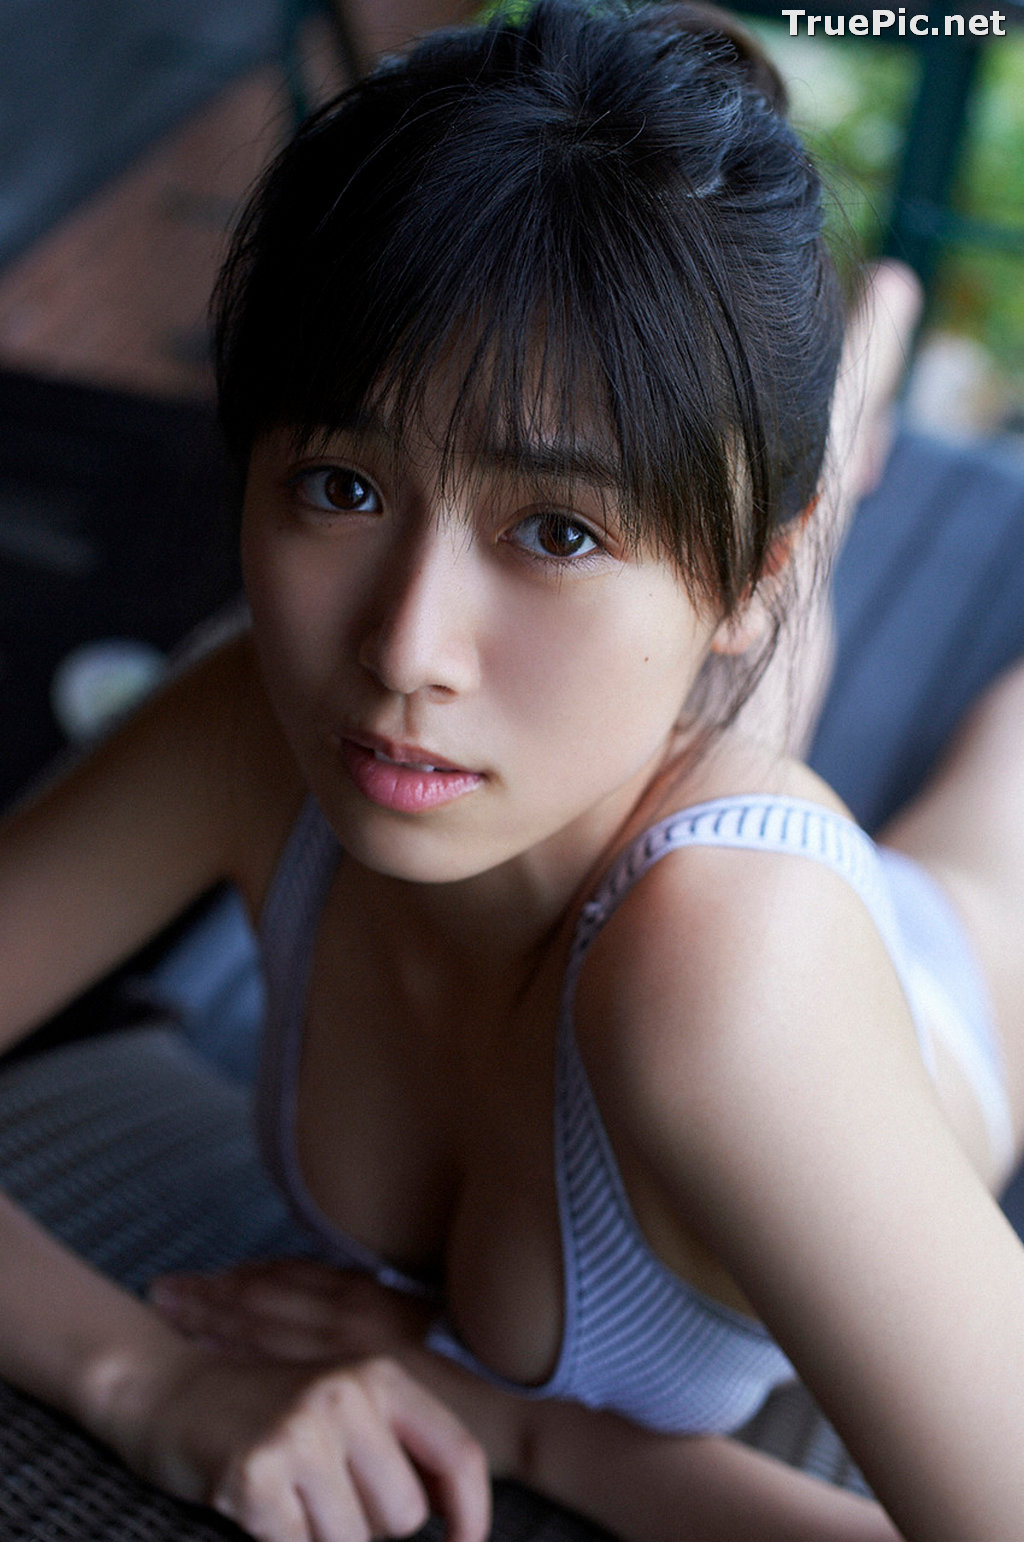 ImageJapanese Gravure Idol and Actress - Kitamuki Miyu (北向珠夕) - Sexy Picture Collection 2020 - TruePic.net - Picture-84